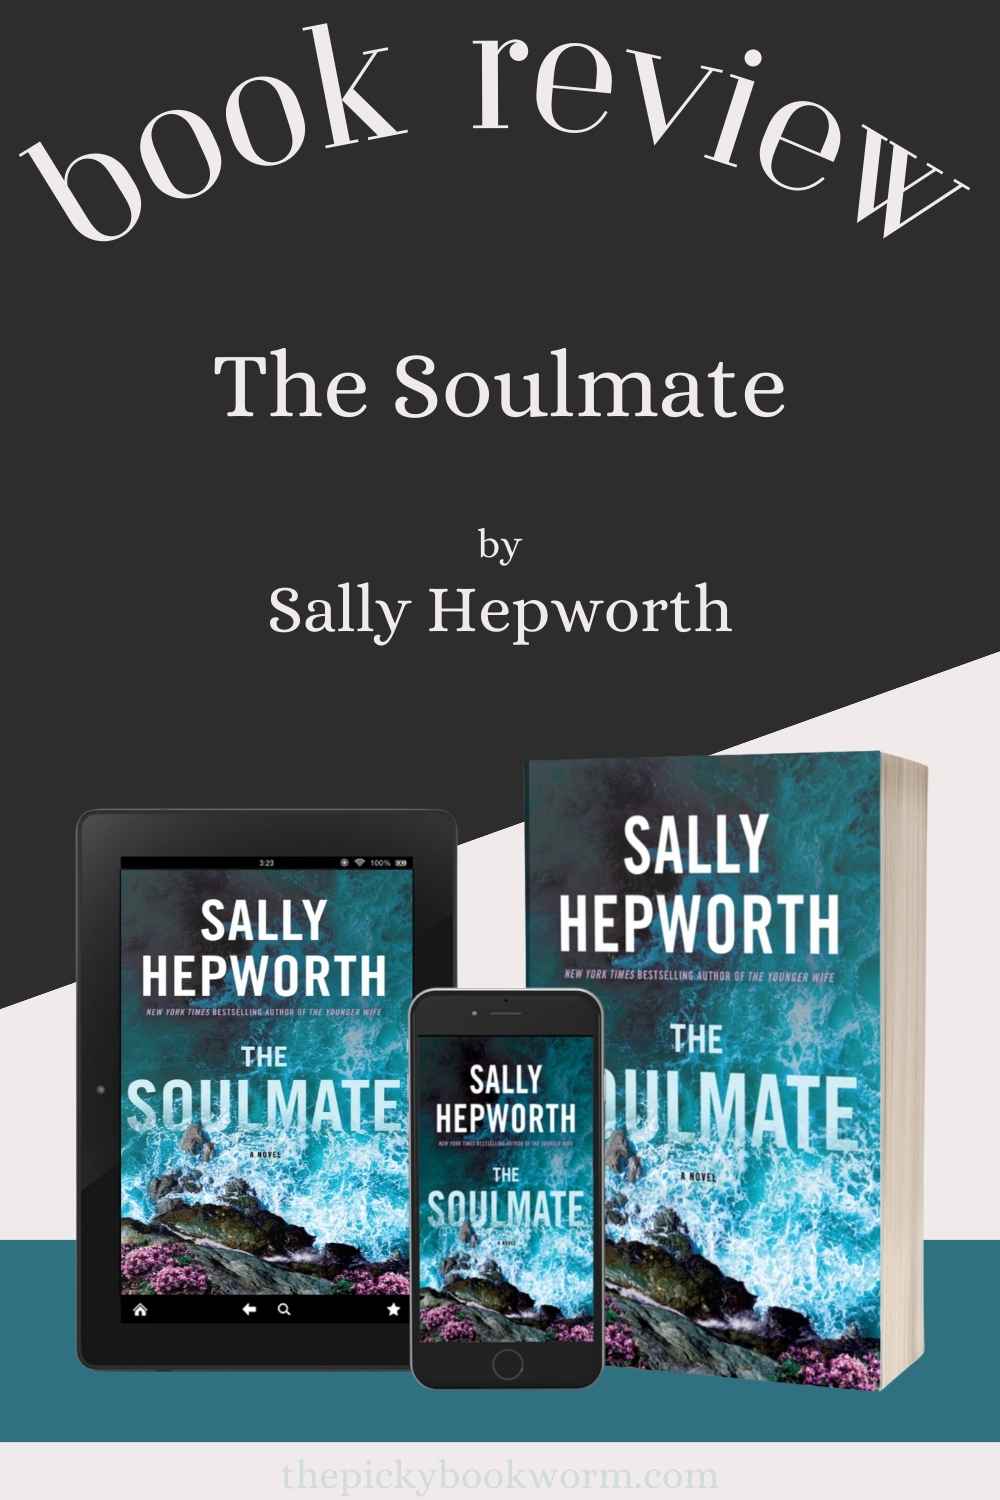 Book Review of The Soulmate by Sally Hepworth on The Picky Bookworm blog.